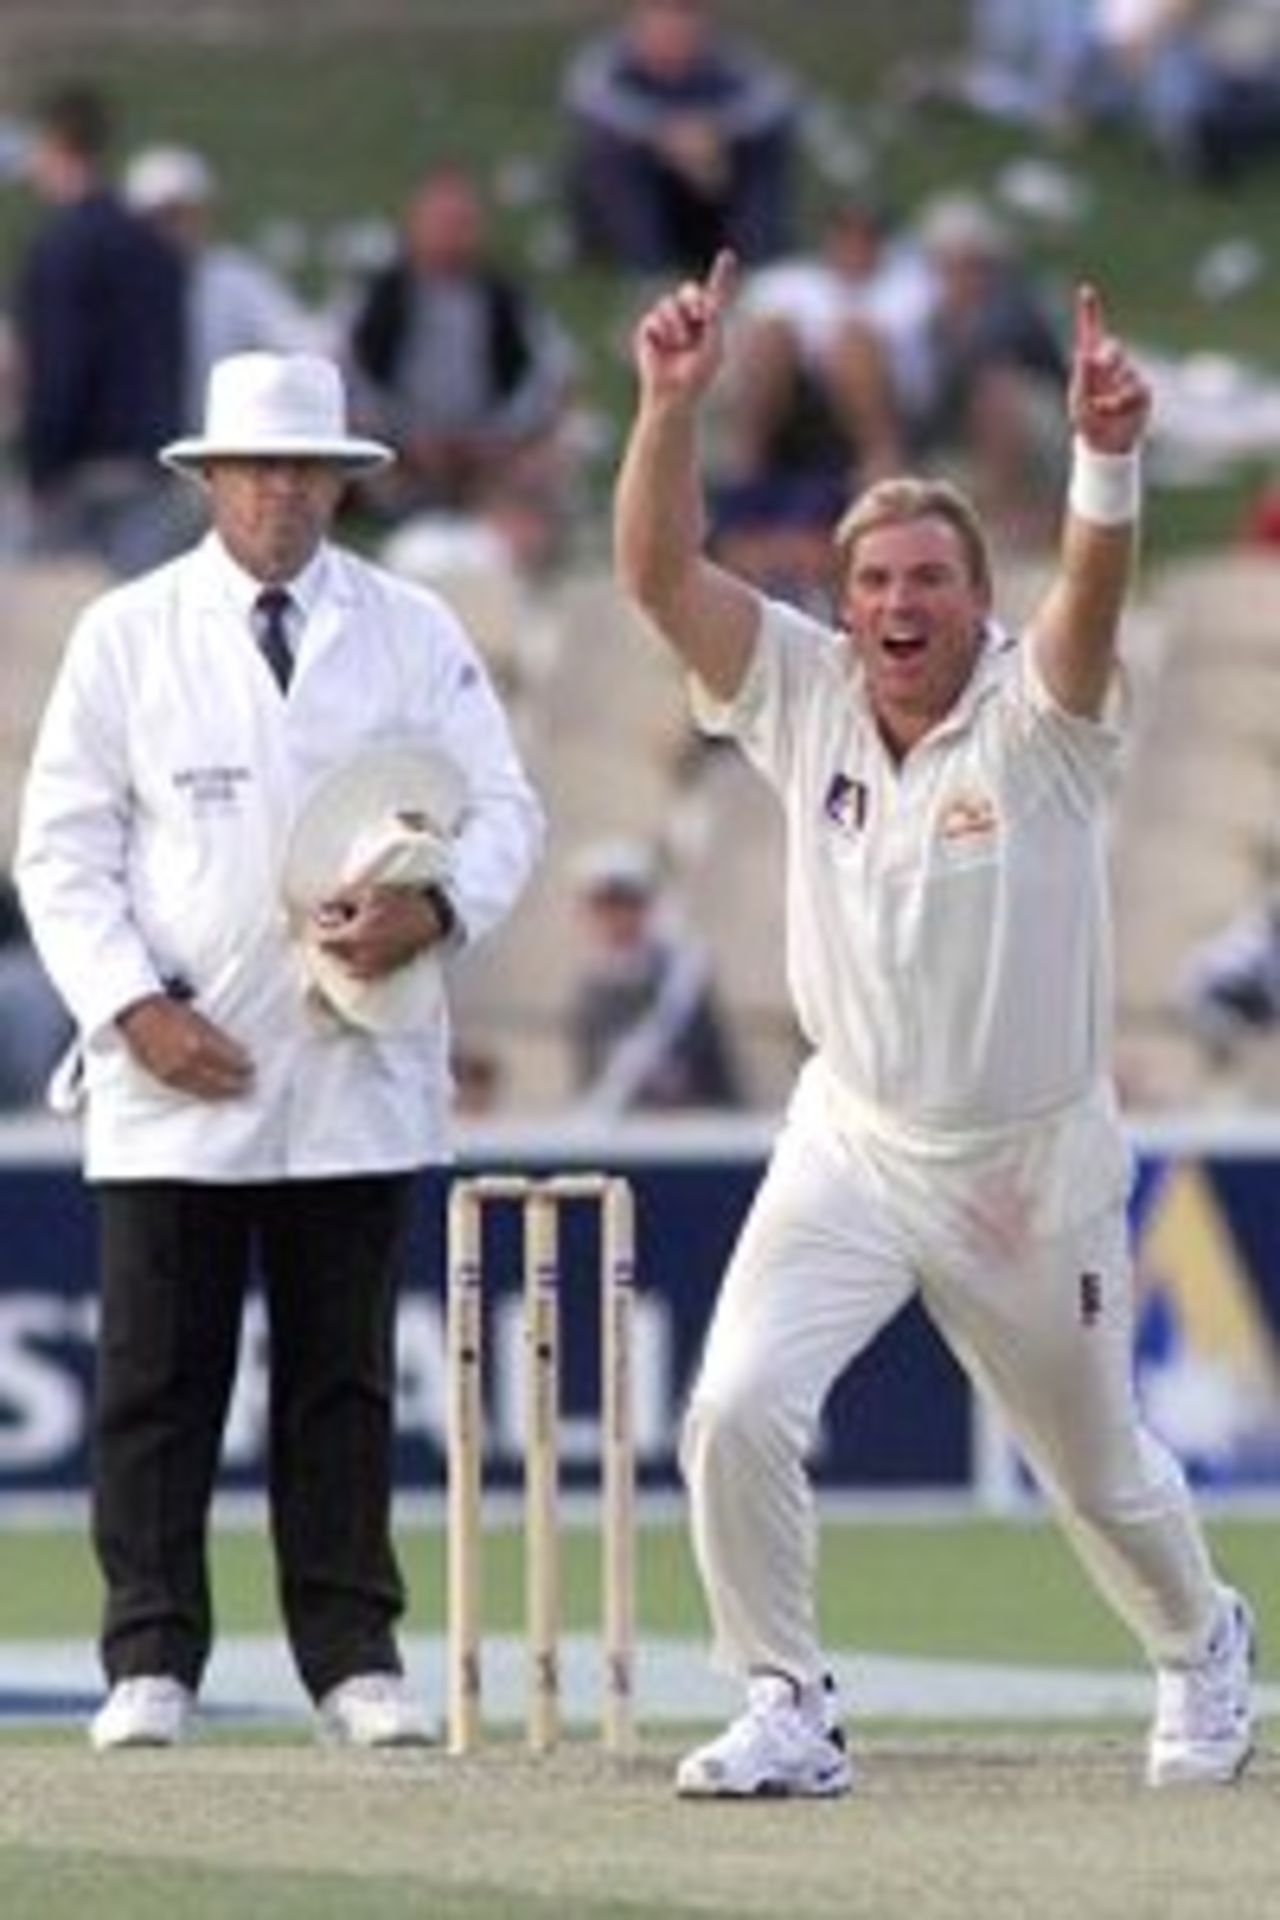 11 Dec 1999: Shane Warne of Australia celebrates the wicket of Rahul Dravid of India with umpire Daryl Harper looking on, on day two of the first test between Australia and India, at the Adelaide Oval, Adelaide, Australia.